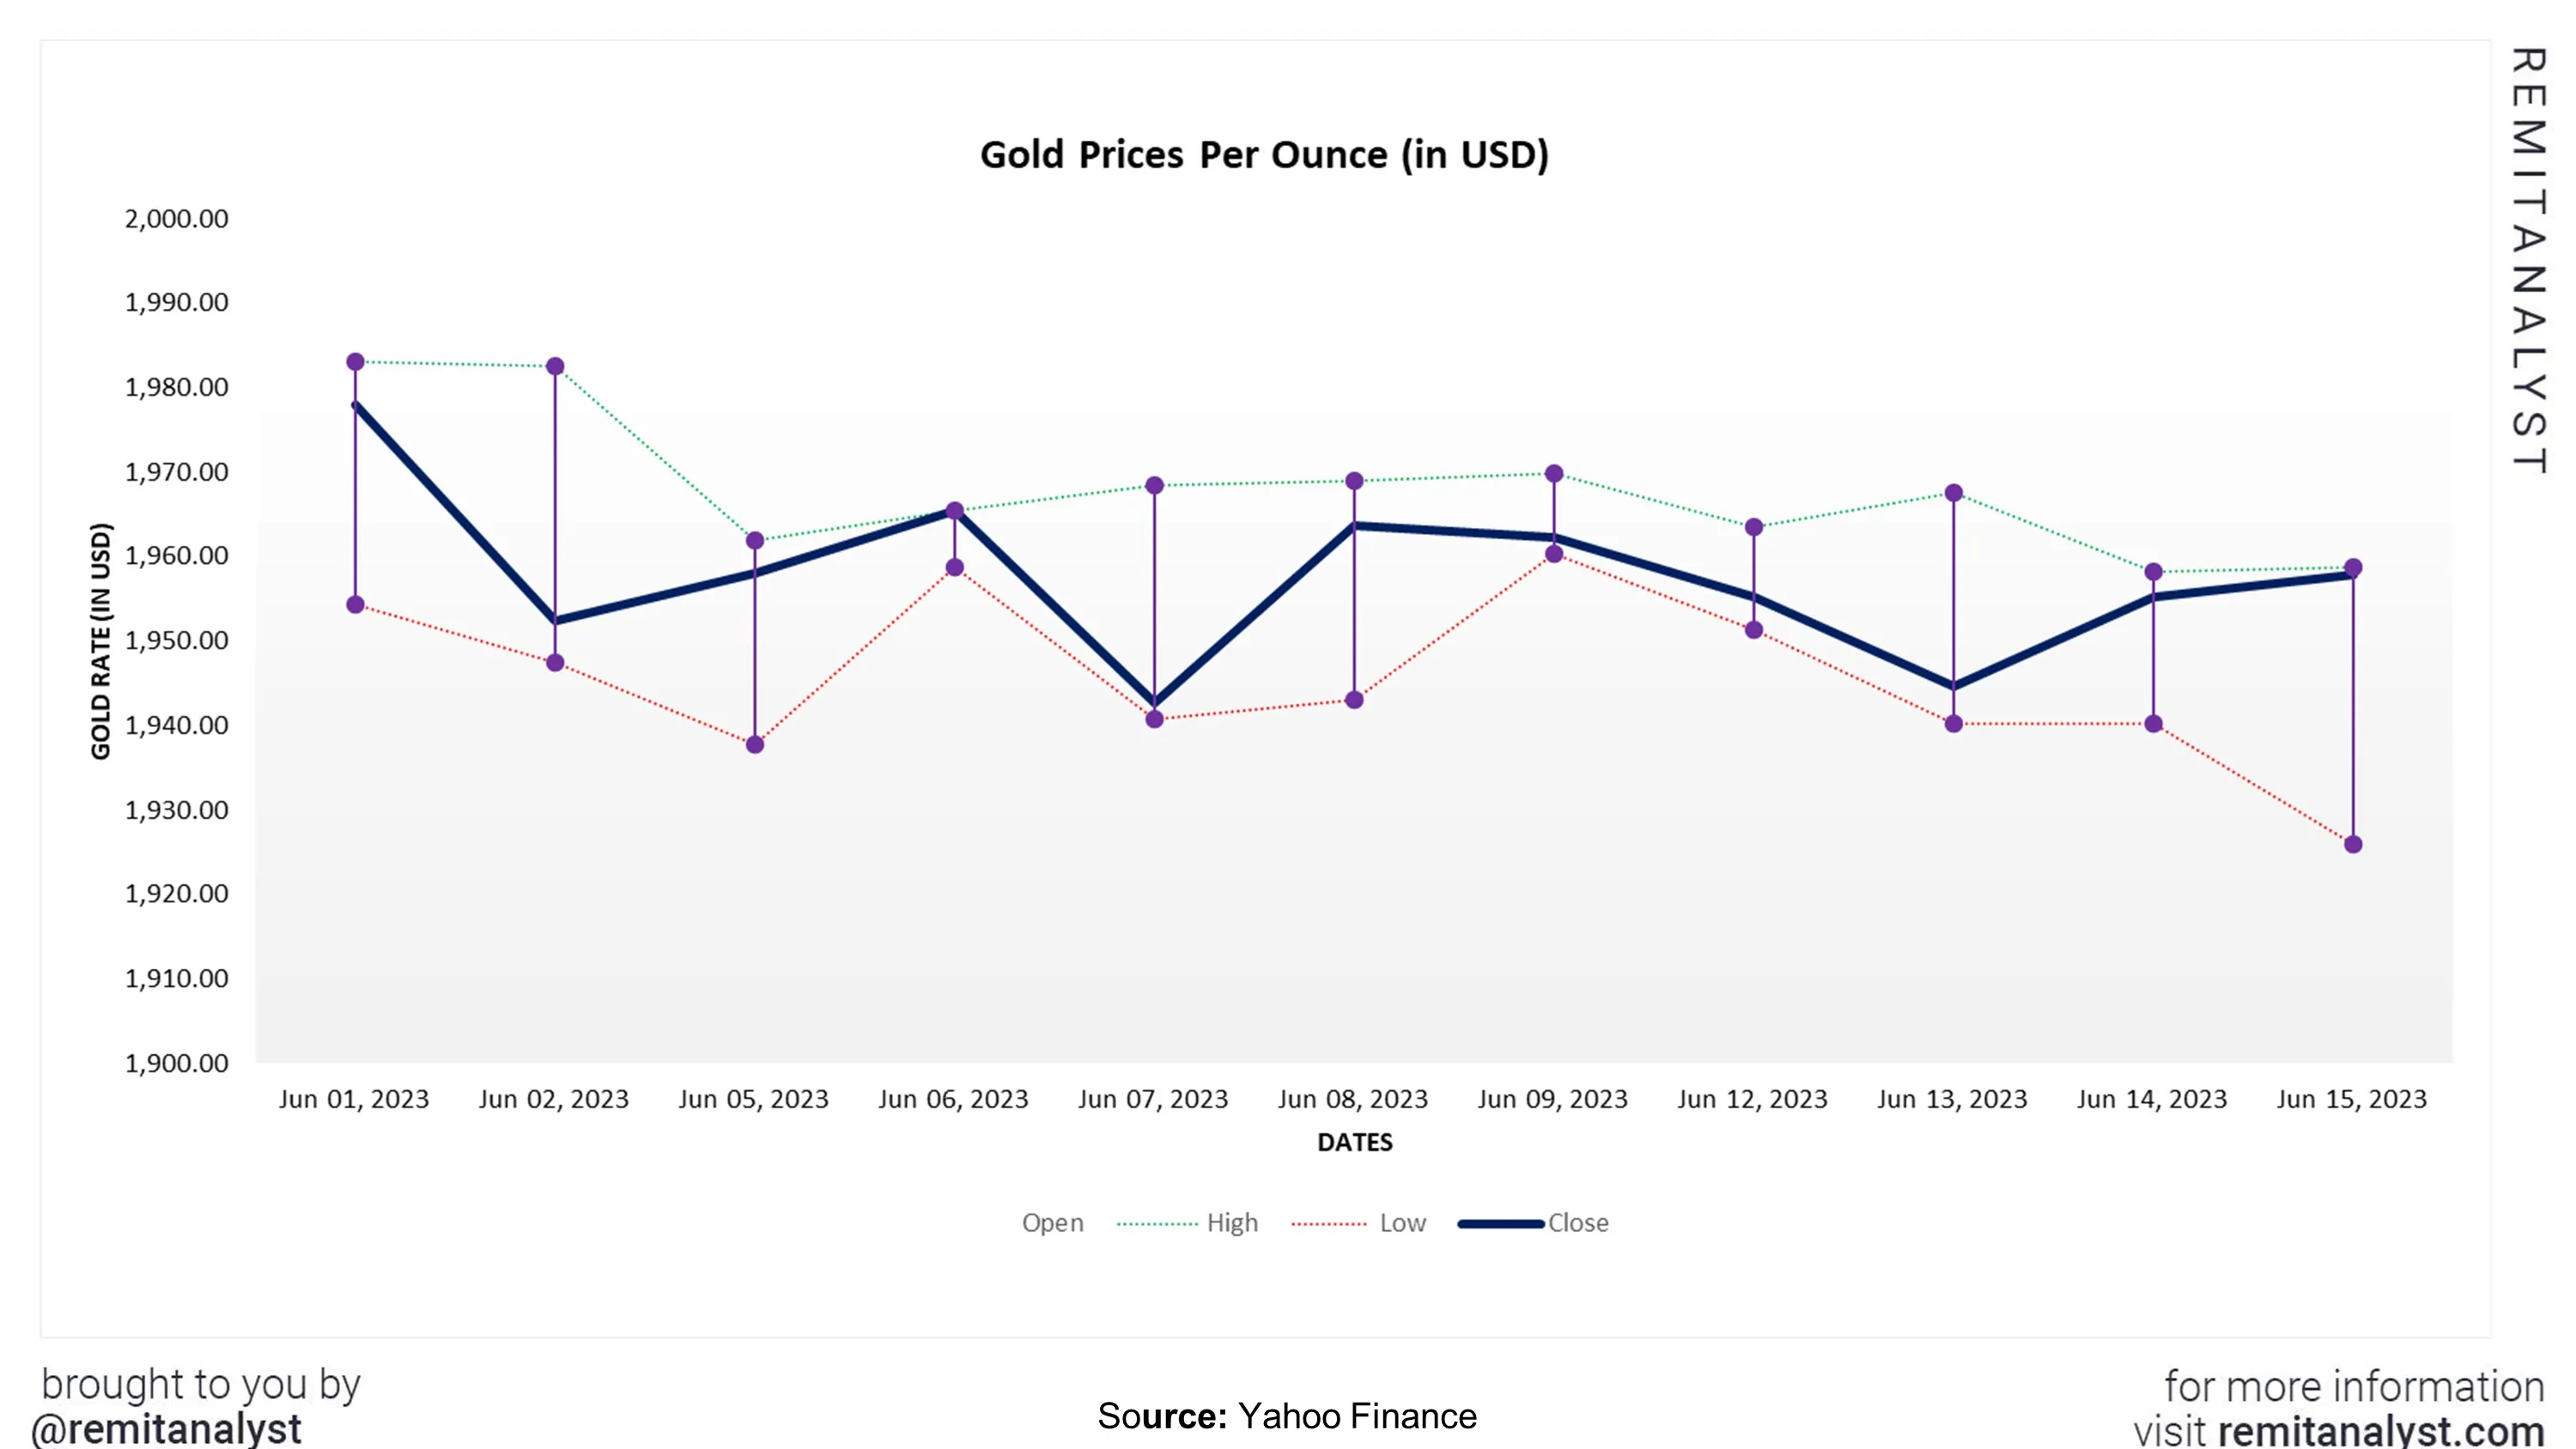 gold-prices-from-1-june-2023-to-15-june-2023